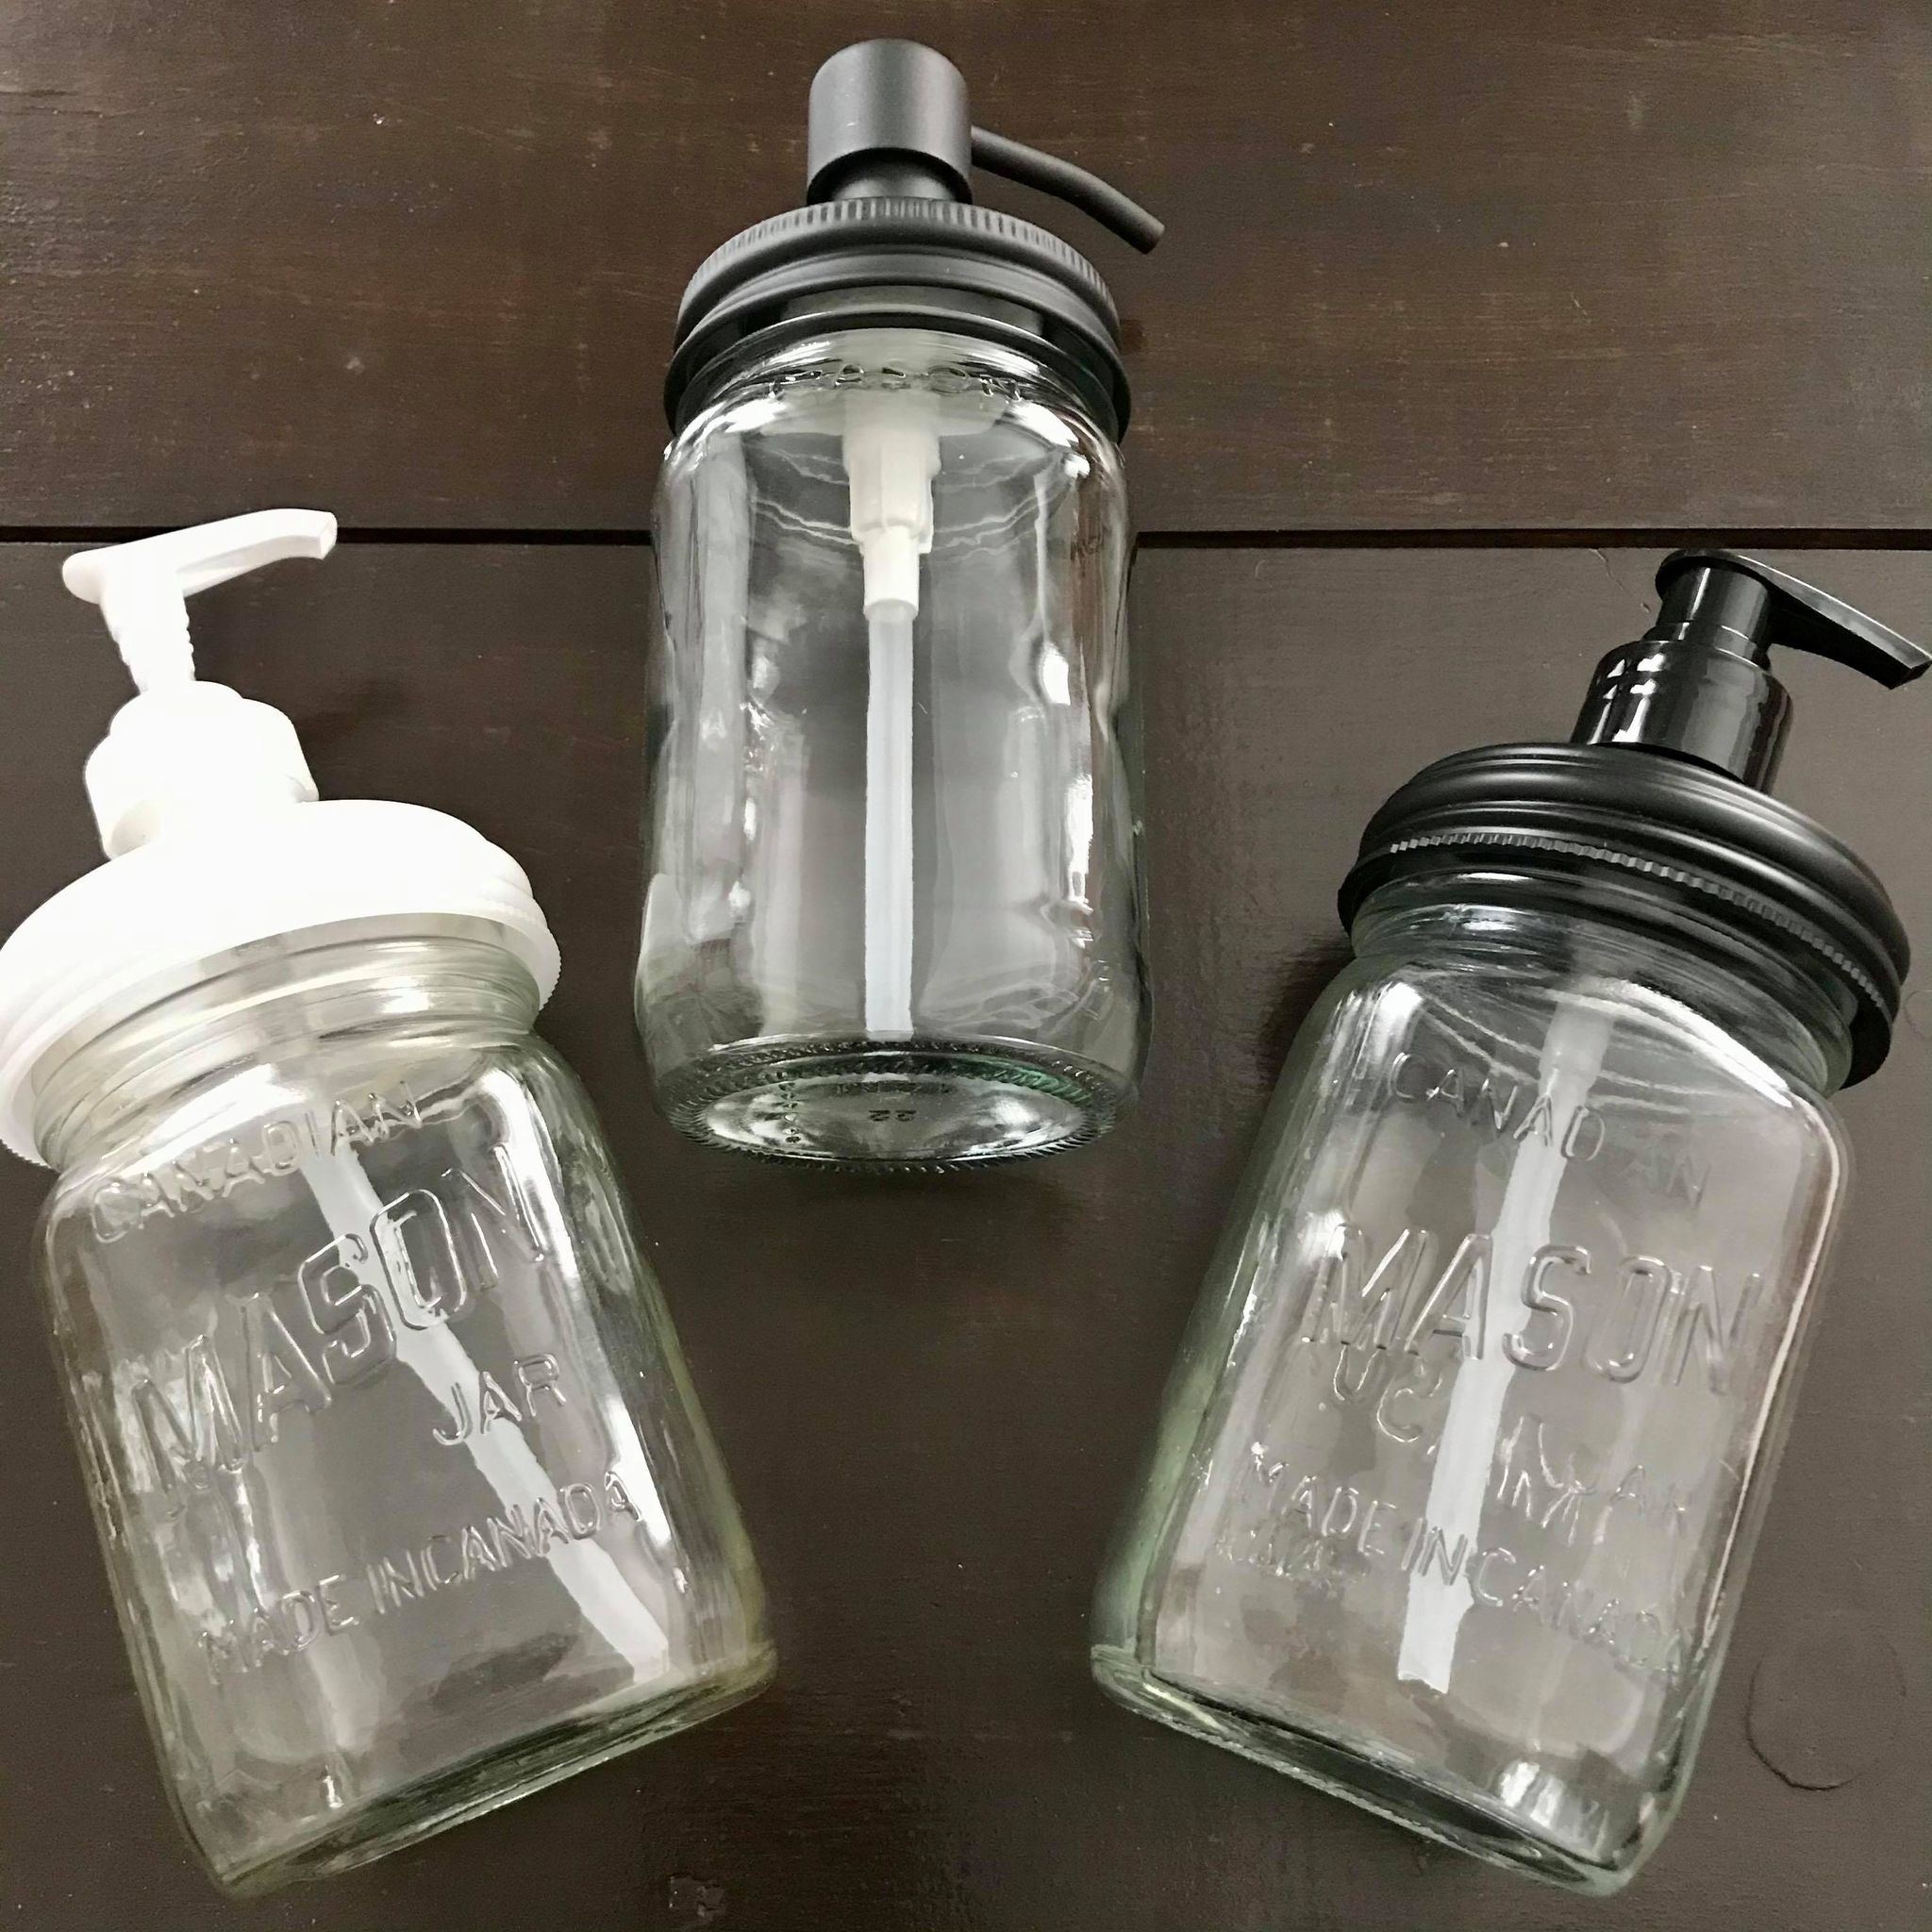 mason jar soap dispensers with pump tops for natural liquid dish and hand soap